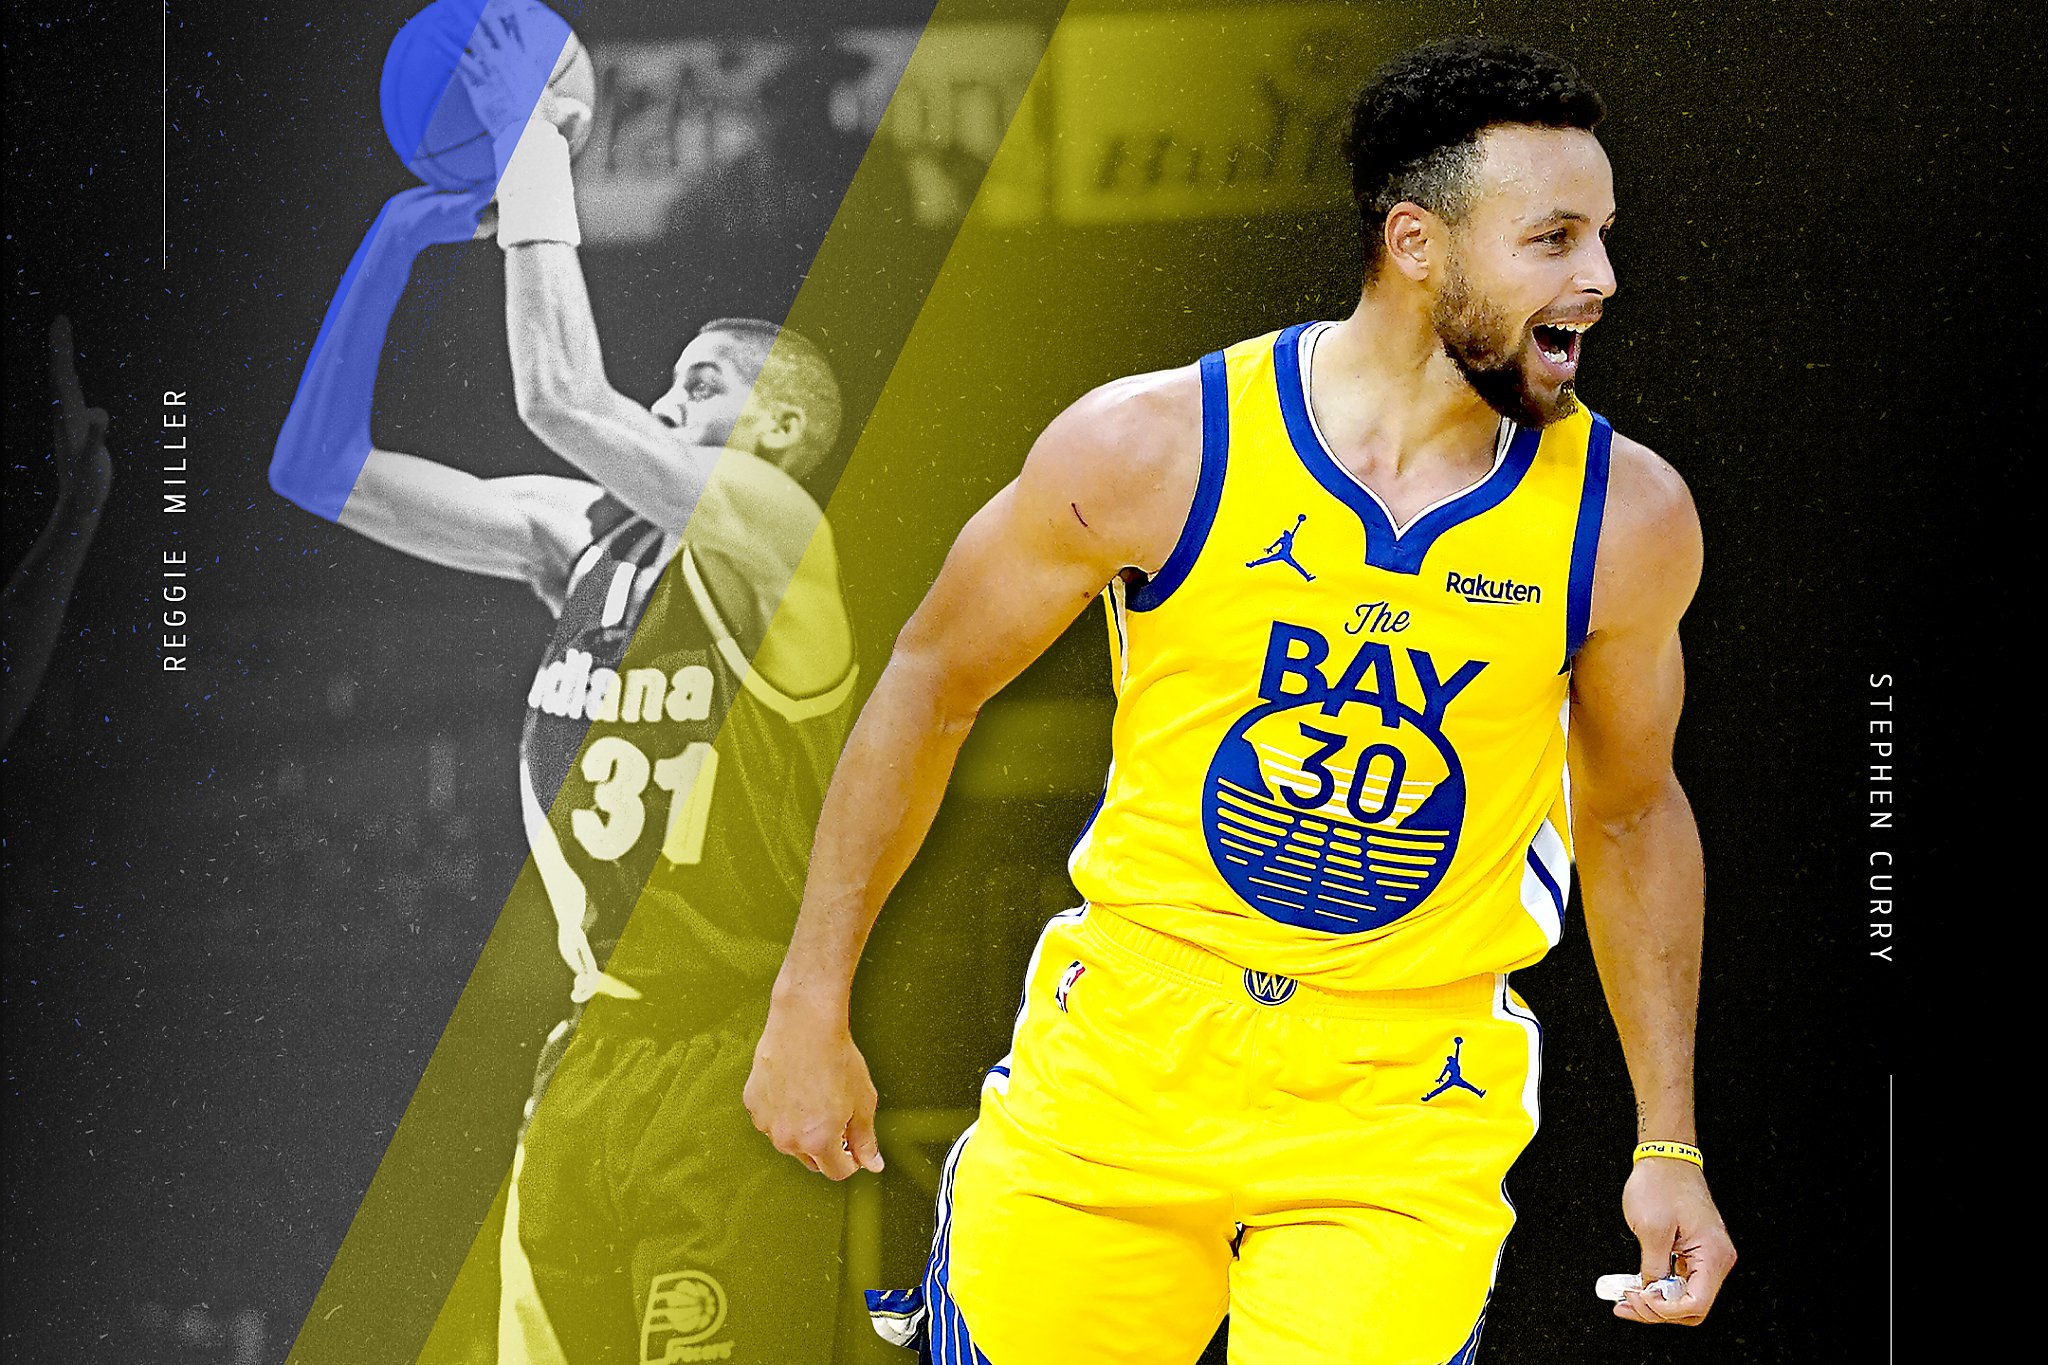 Warriors' Stephen Curry sets NBA career 3-point record - The